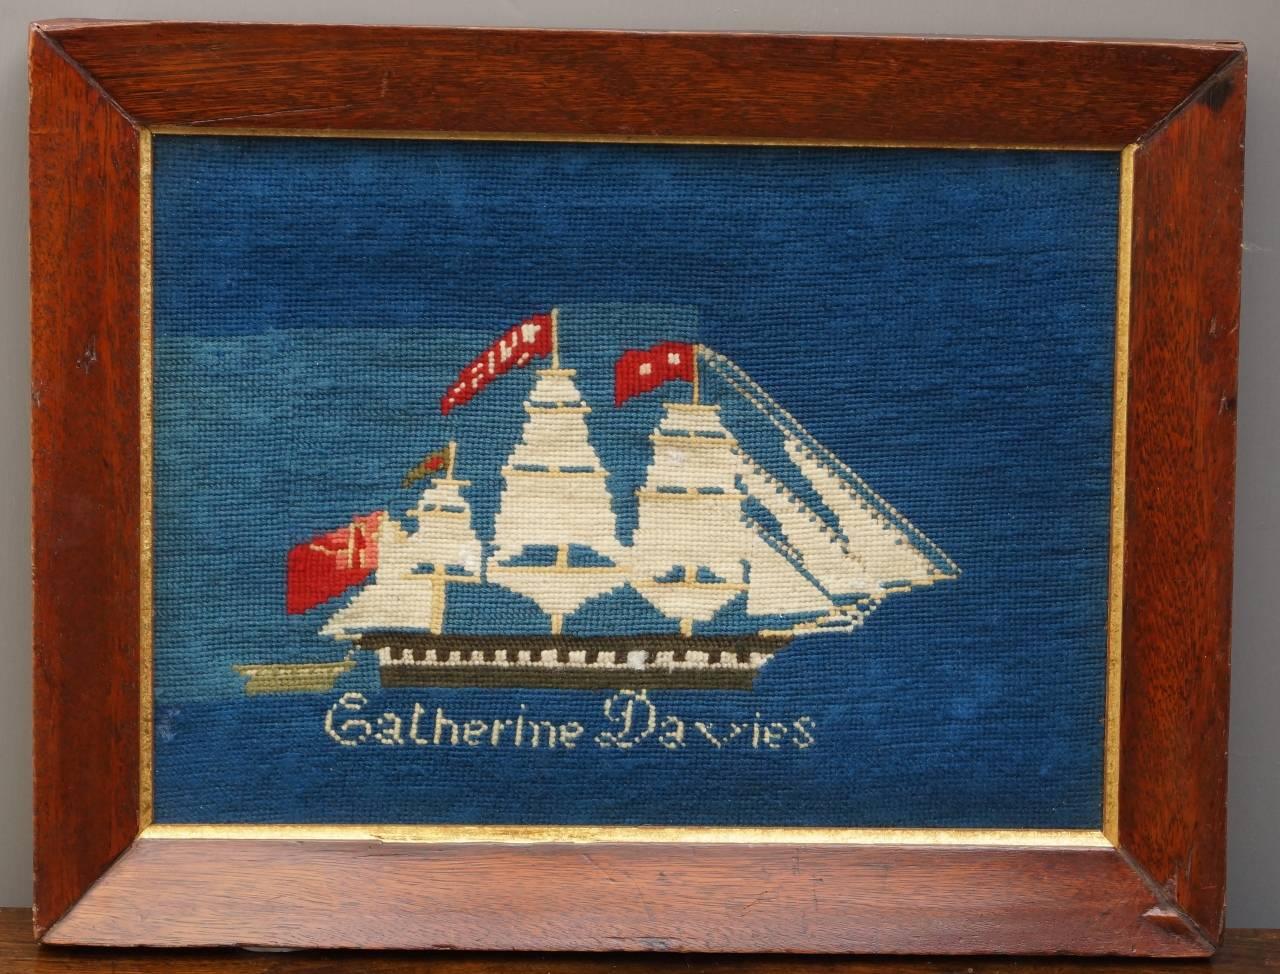 This rare and unique Welsh decorative woolwork, dates to the mid-19th century and was produced in 1865 by one of the 1st settlers in Patagonia, South America. This needlework picture uncovers a poignant migration story of the hopes and dreams of